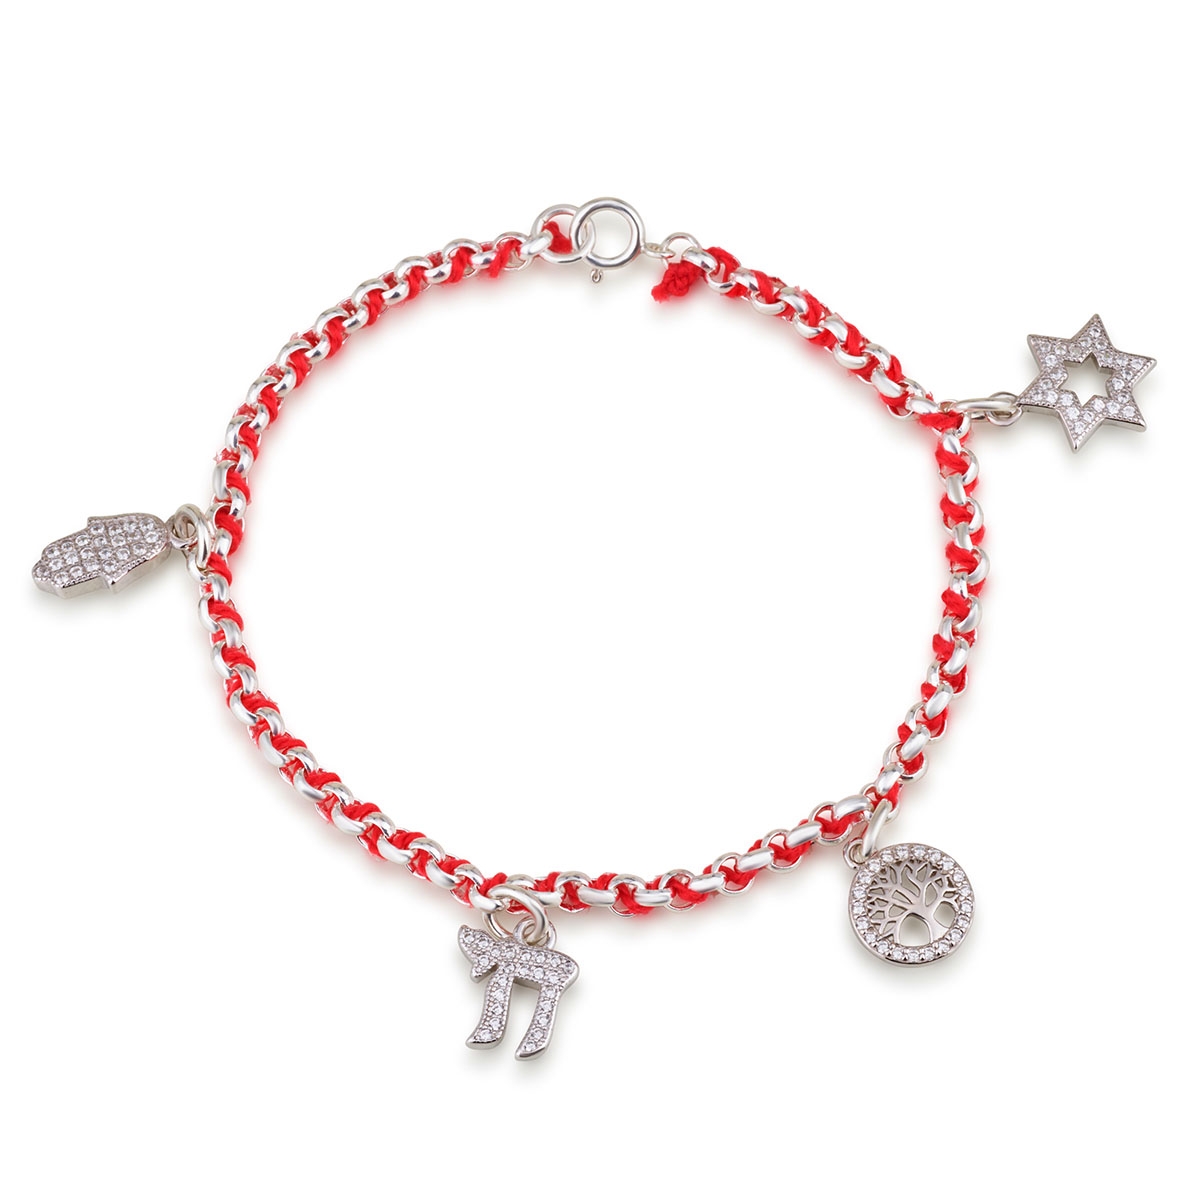 https://www.judaicawebstore.com/media/catalog/product/cache/ba58a6efc180a858d4da618c3c46b6cb/s/t/sterling_silver_bracelet_with_various_jewish_charms.jpg